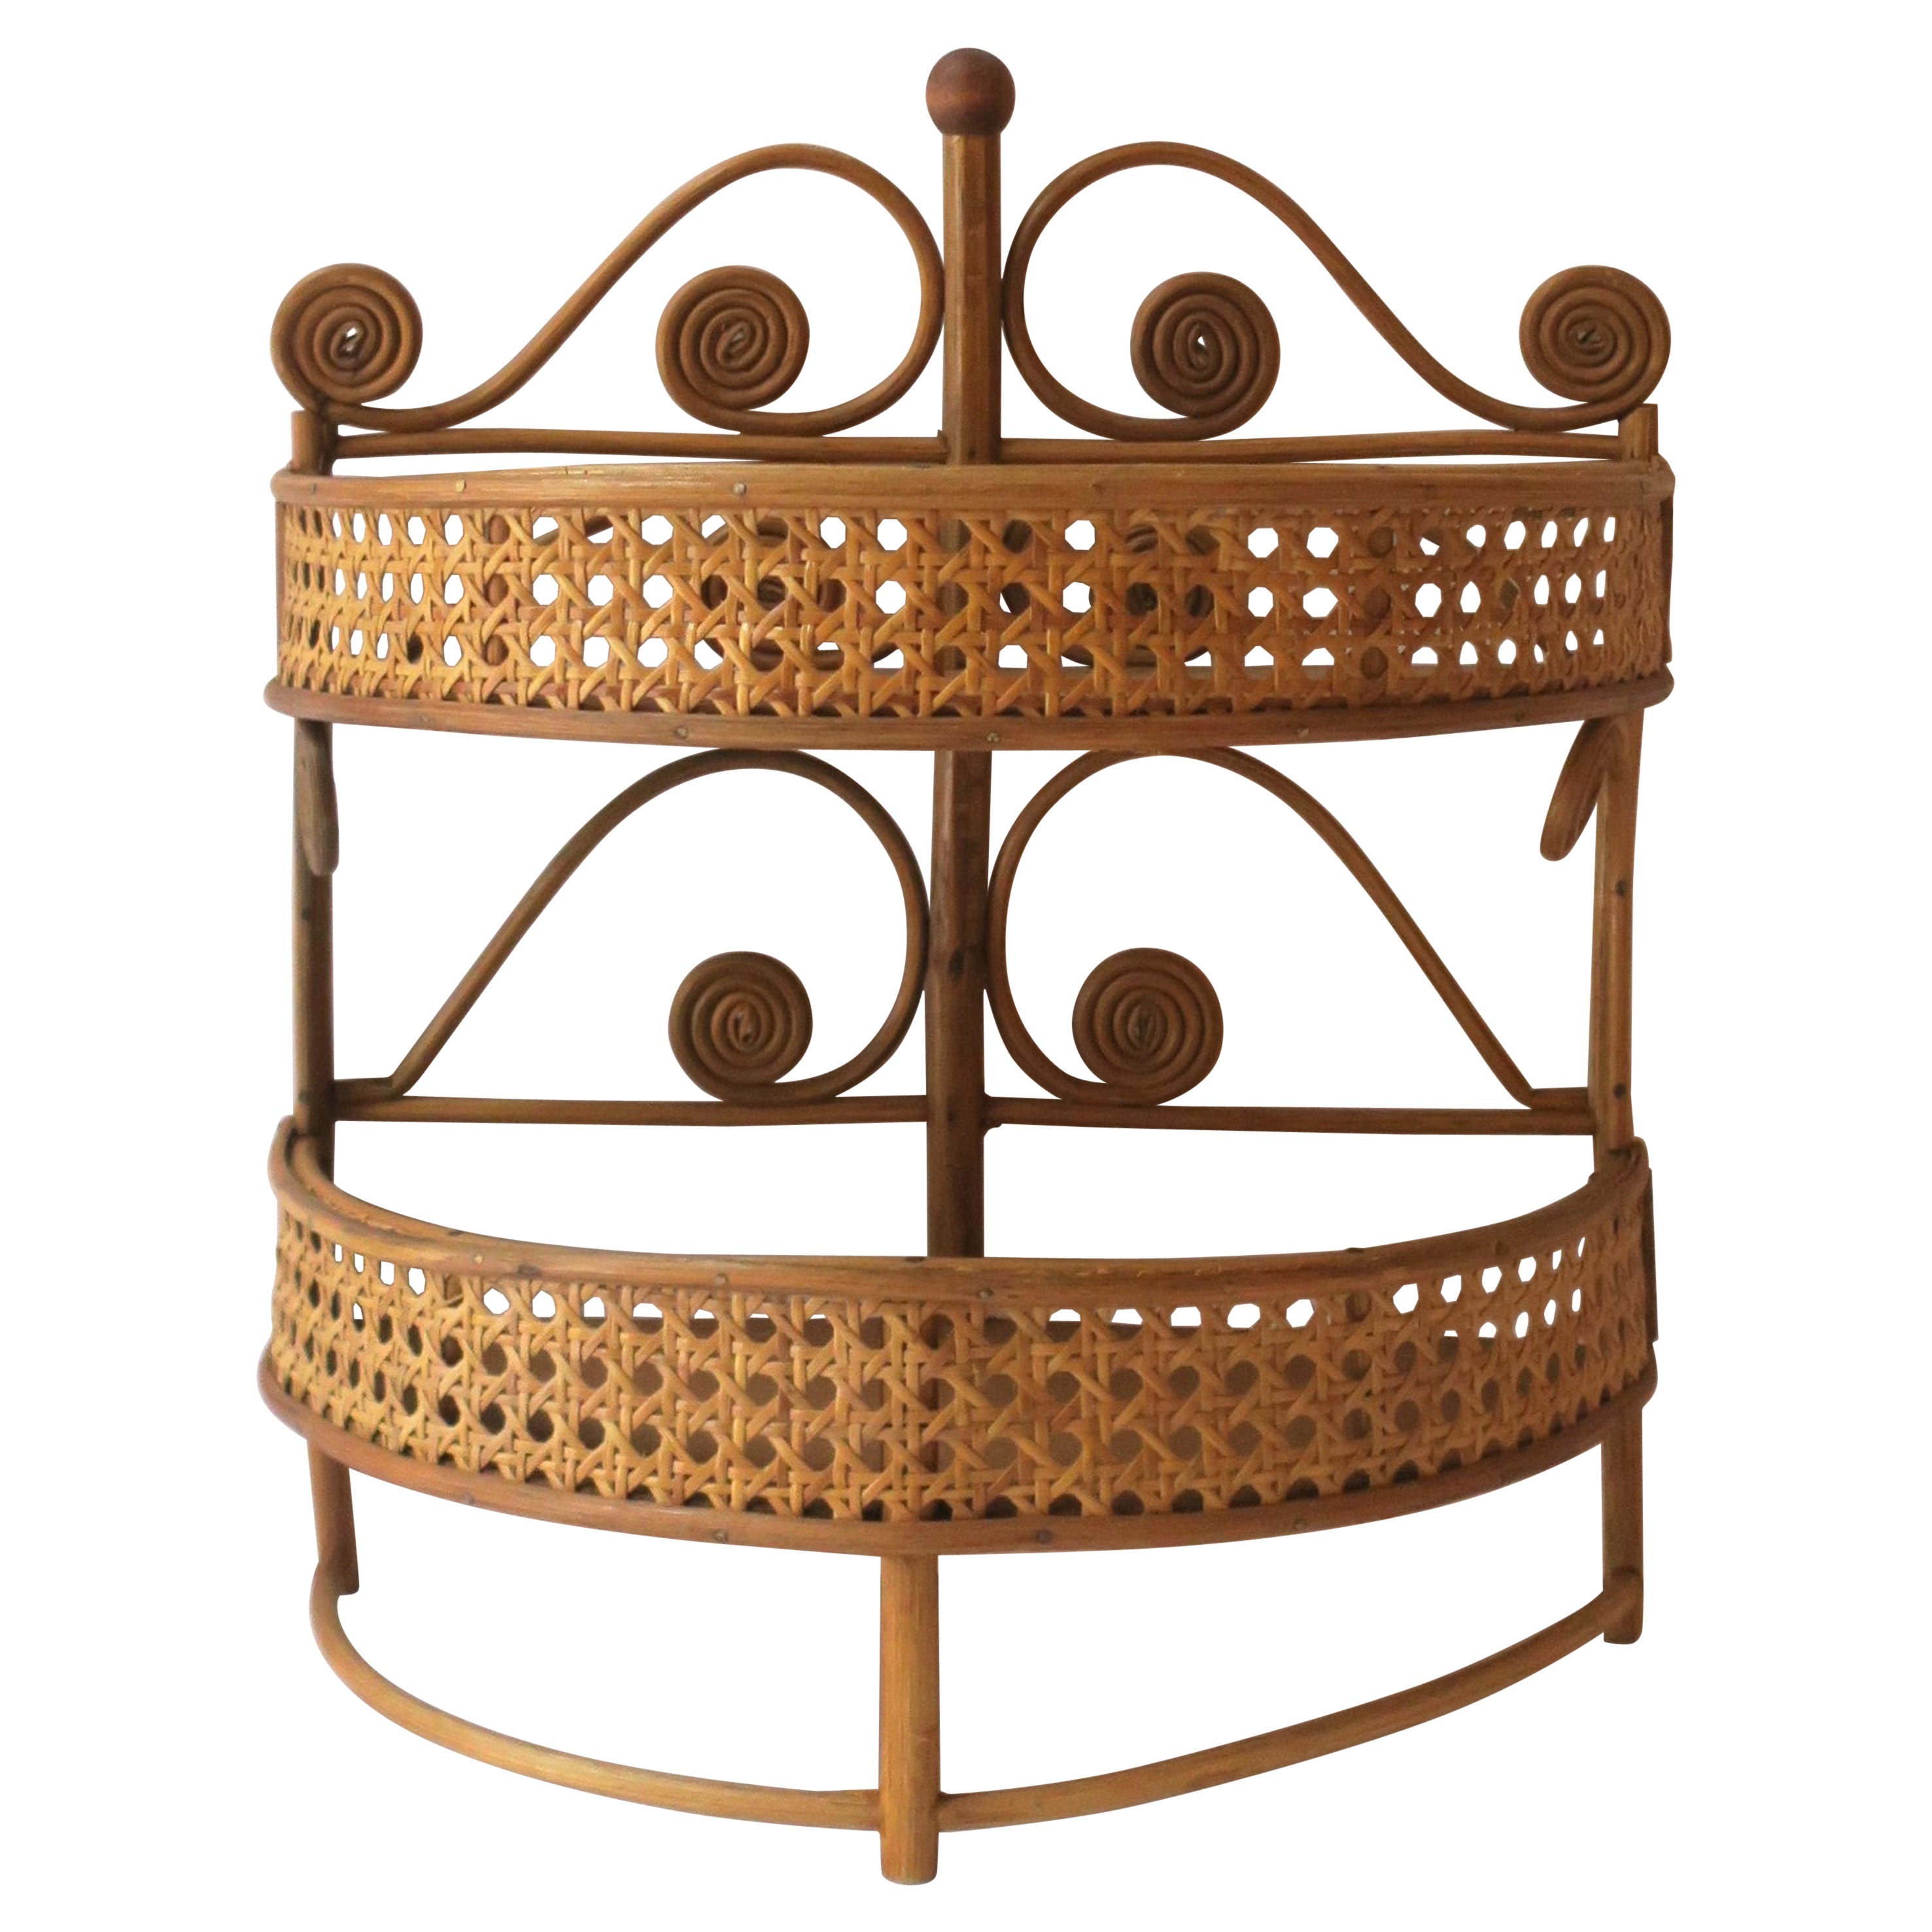 Wicker and Cane Wall Shelf For Sale